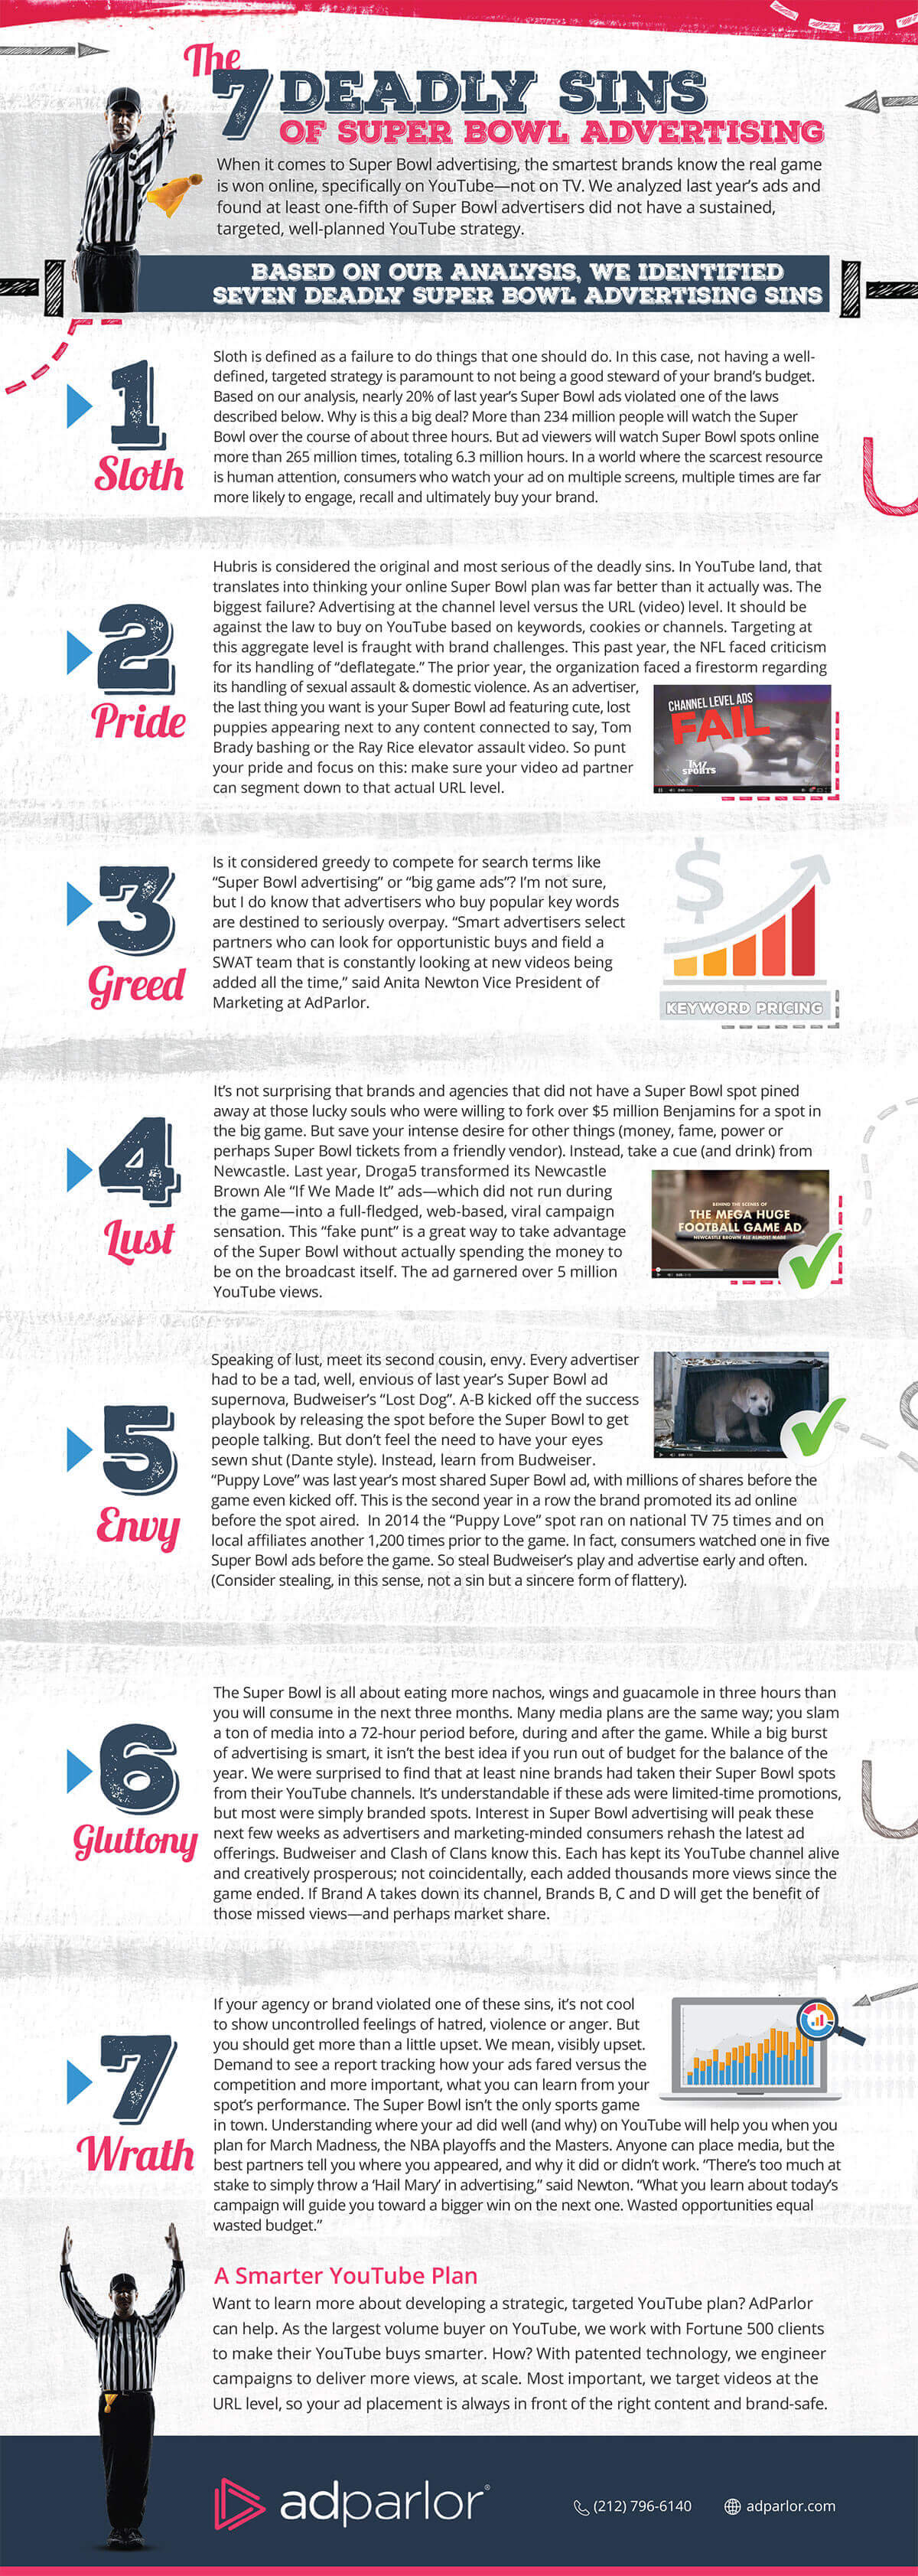 Infographic: The 7 Deadly Sins of Super Bowl Advertising